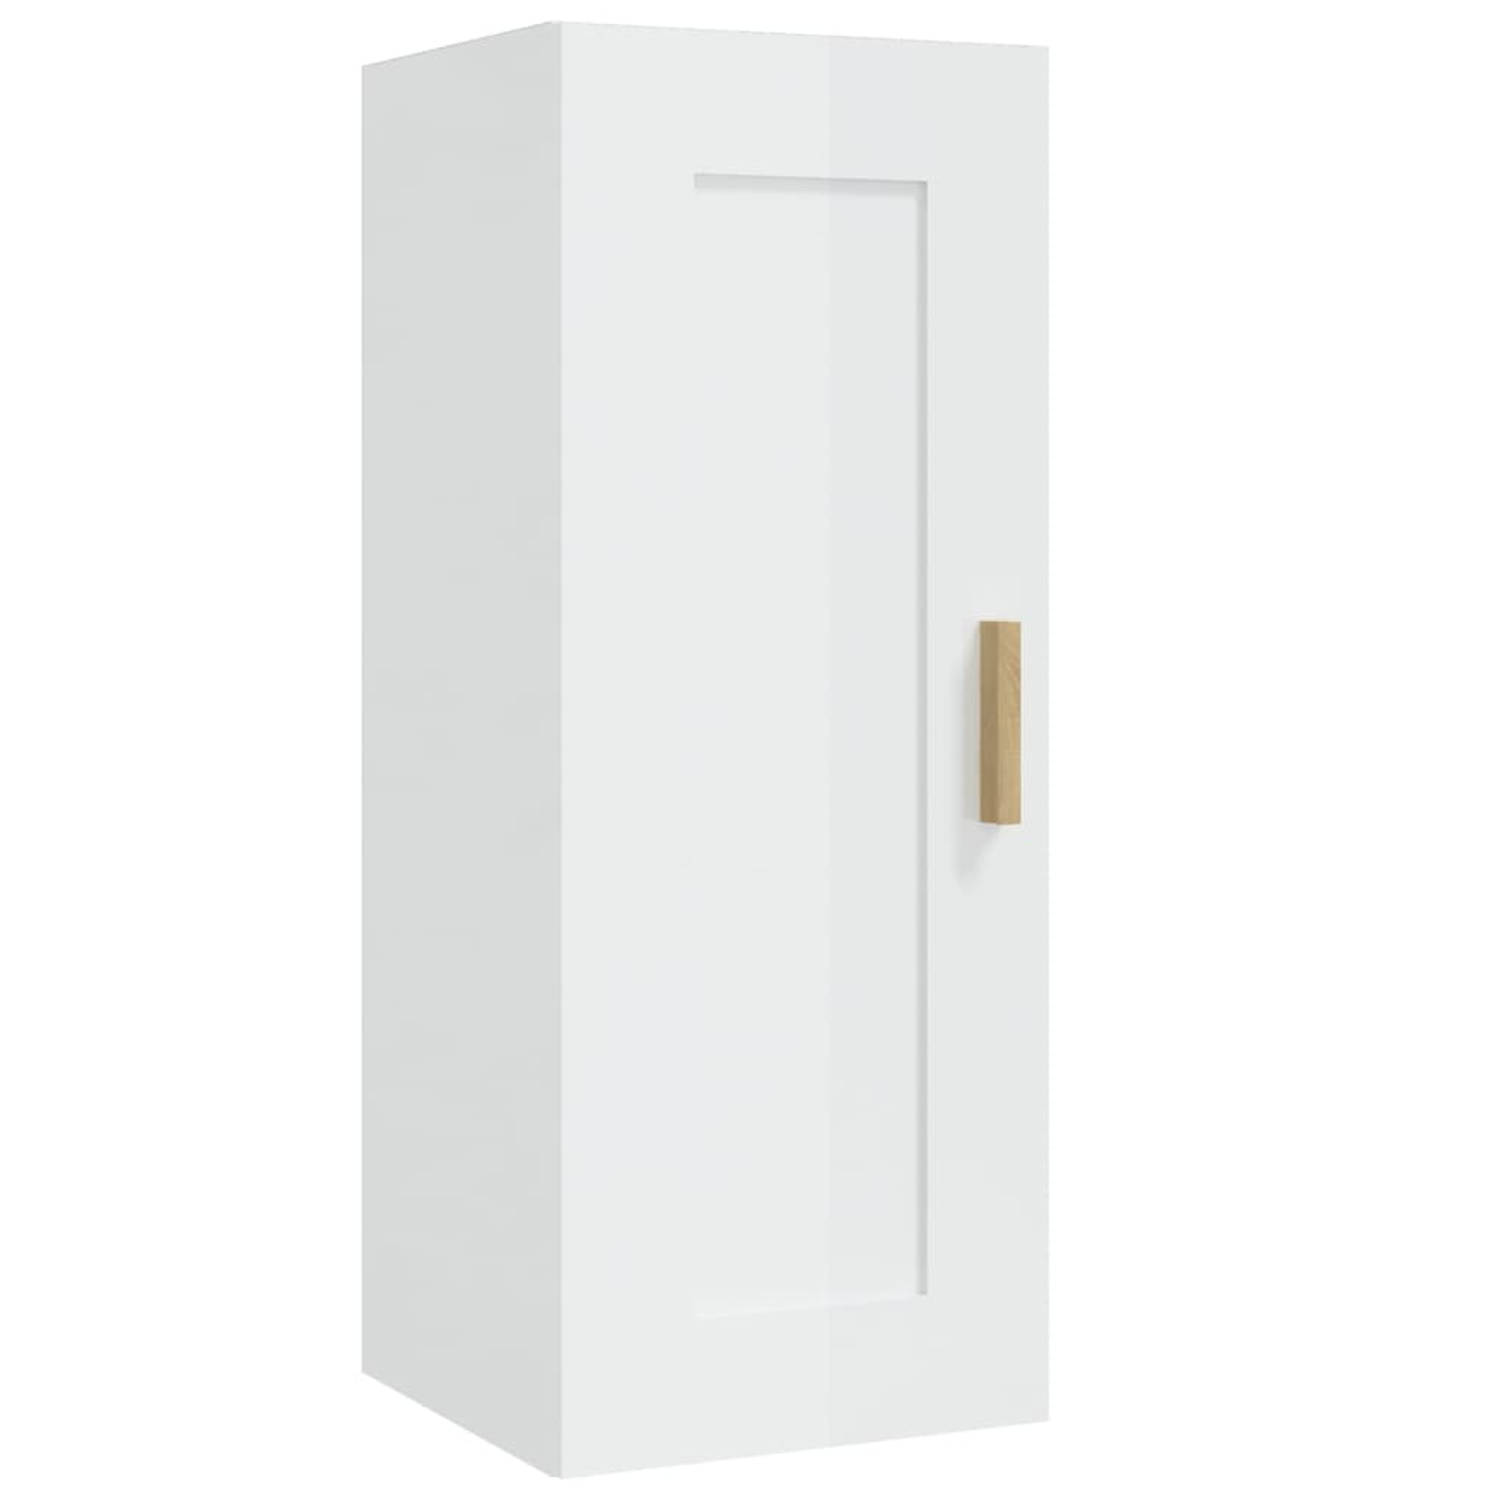 The Living Store Wandkast Hout - 35x34x90 cm - Hoogglans Wit